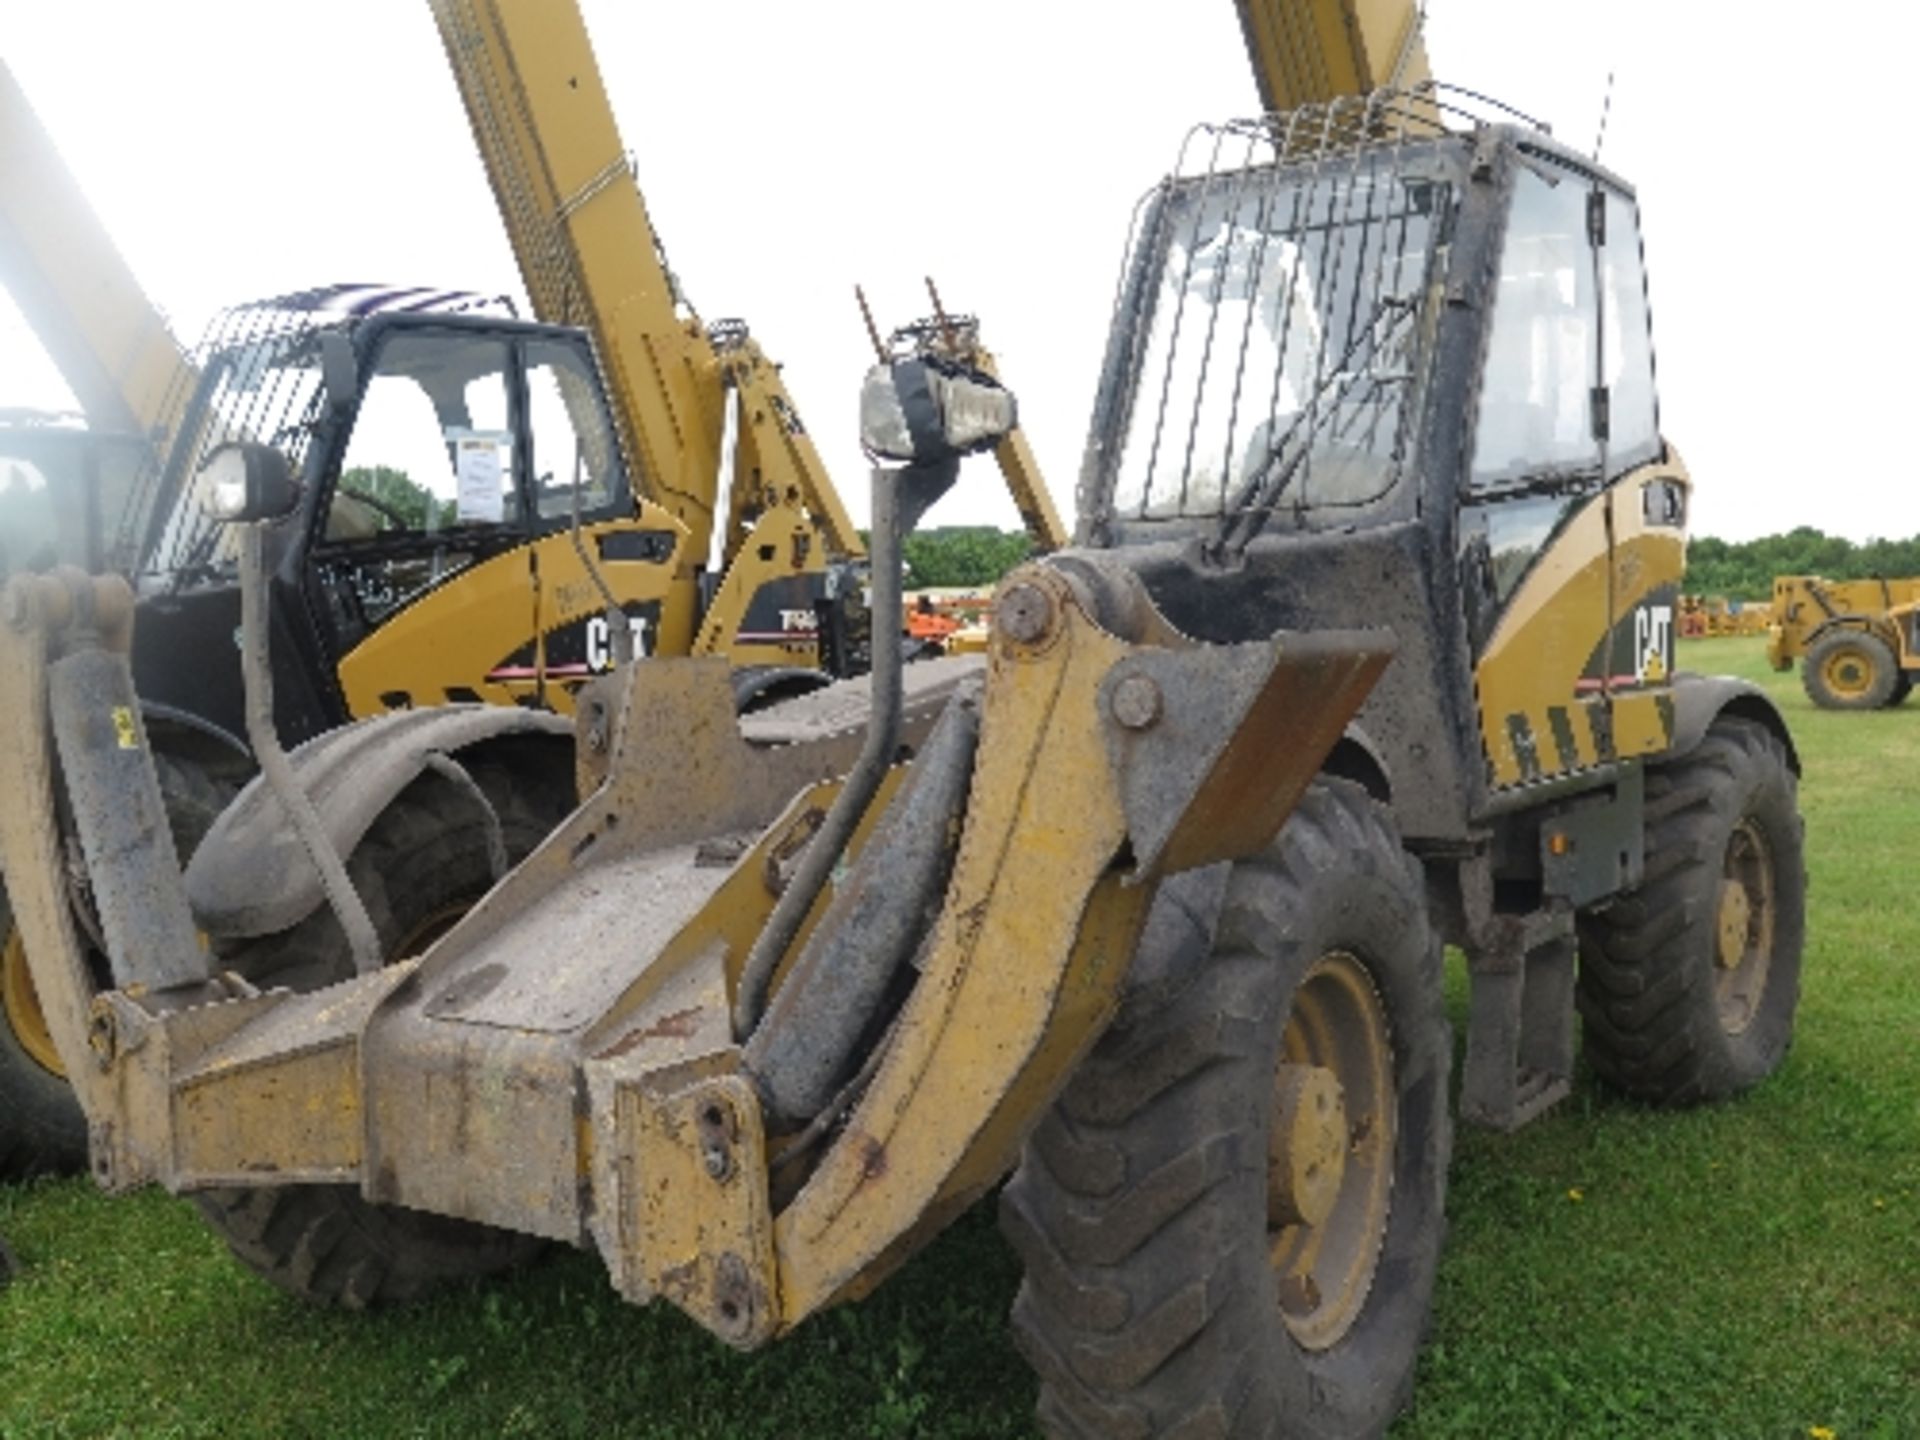 Caterpillar TH580B telehandler 7061 hrs  136316
BELIEVED 2005
POOR COSMETICS
ALL LOTS are SOLD AS - Image 3 of 8